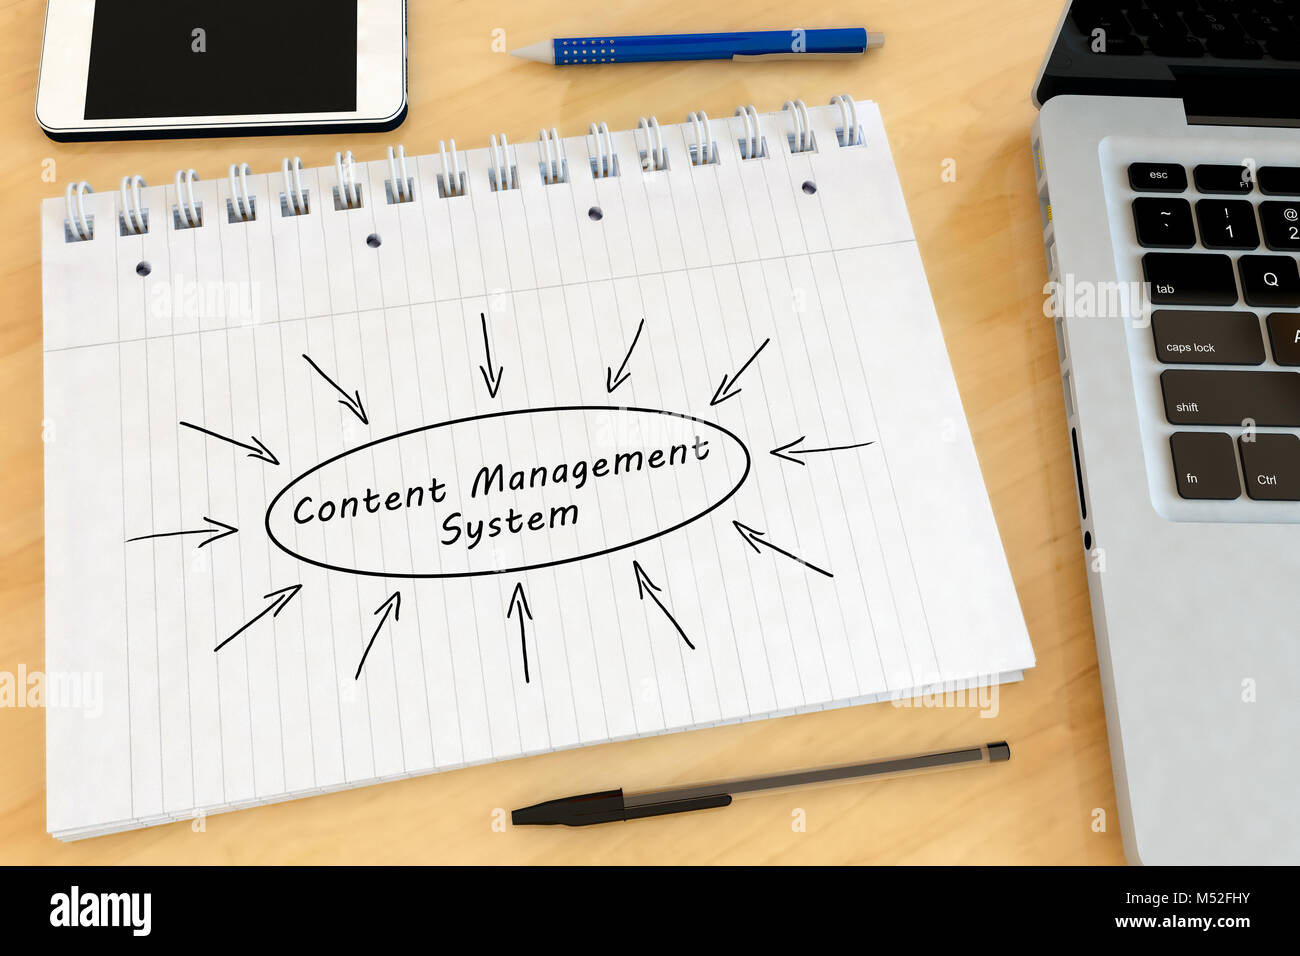 Content Management System Stock Photo